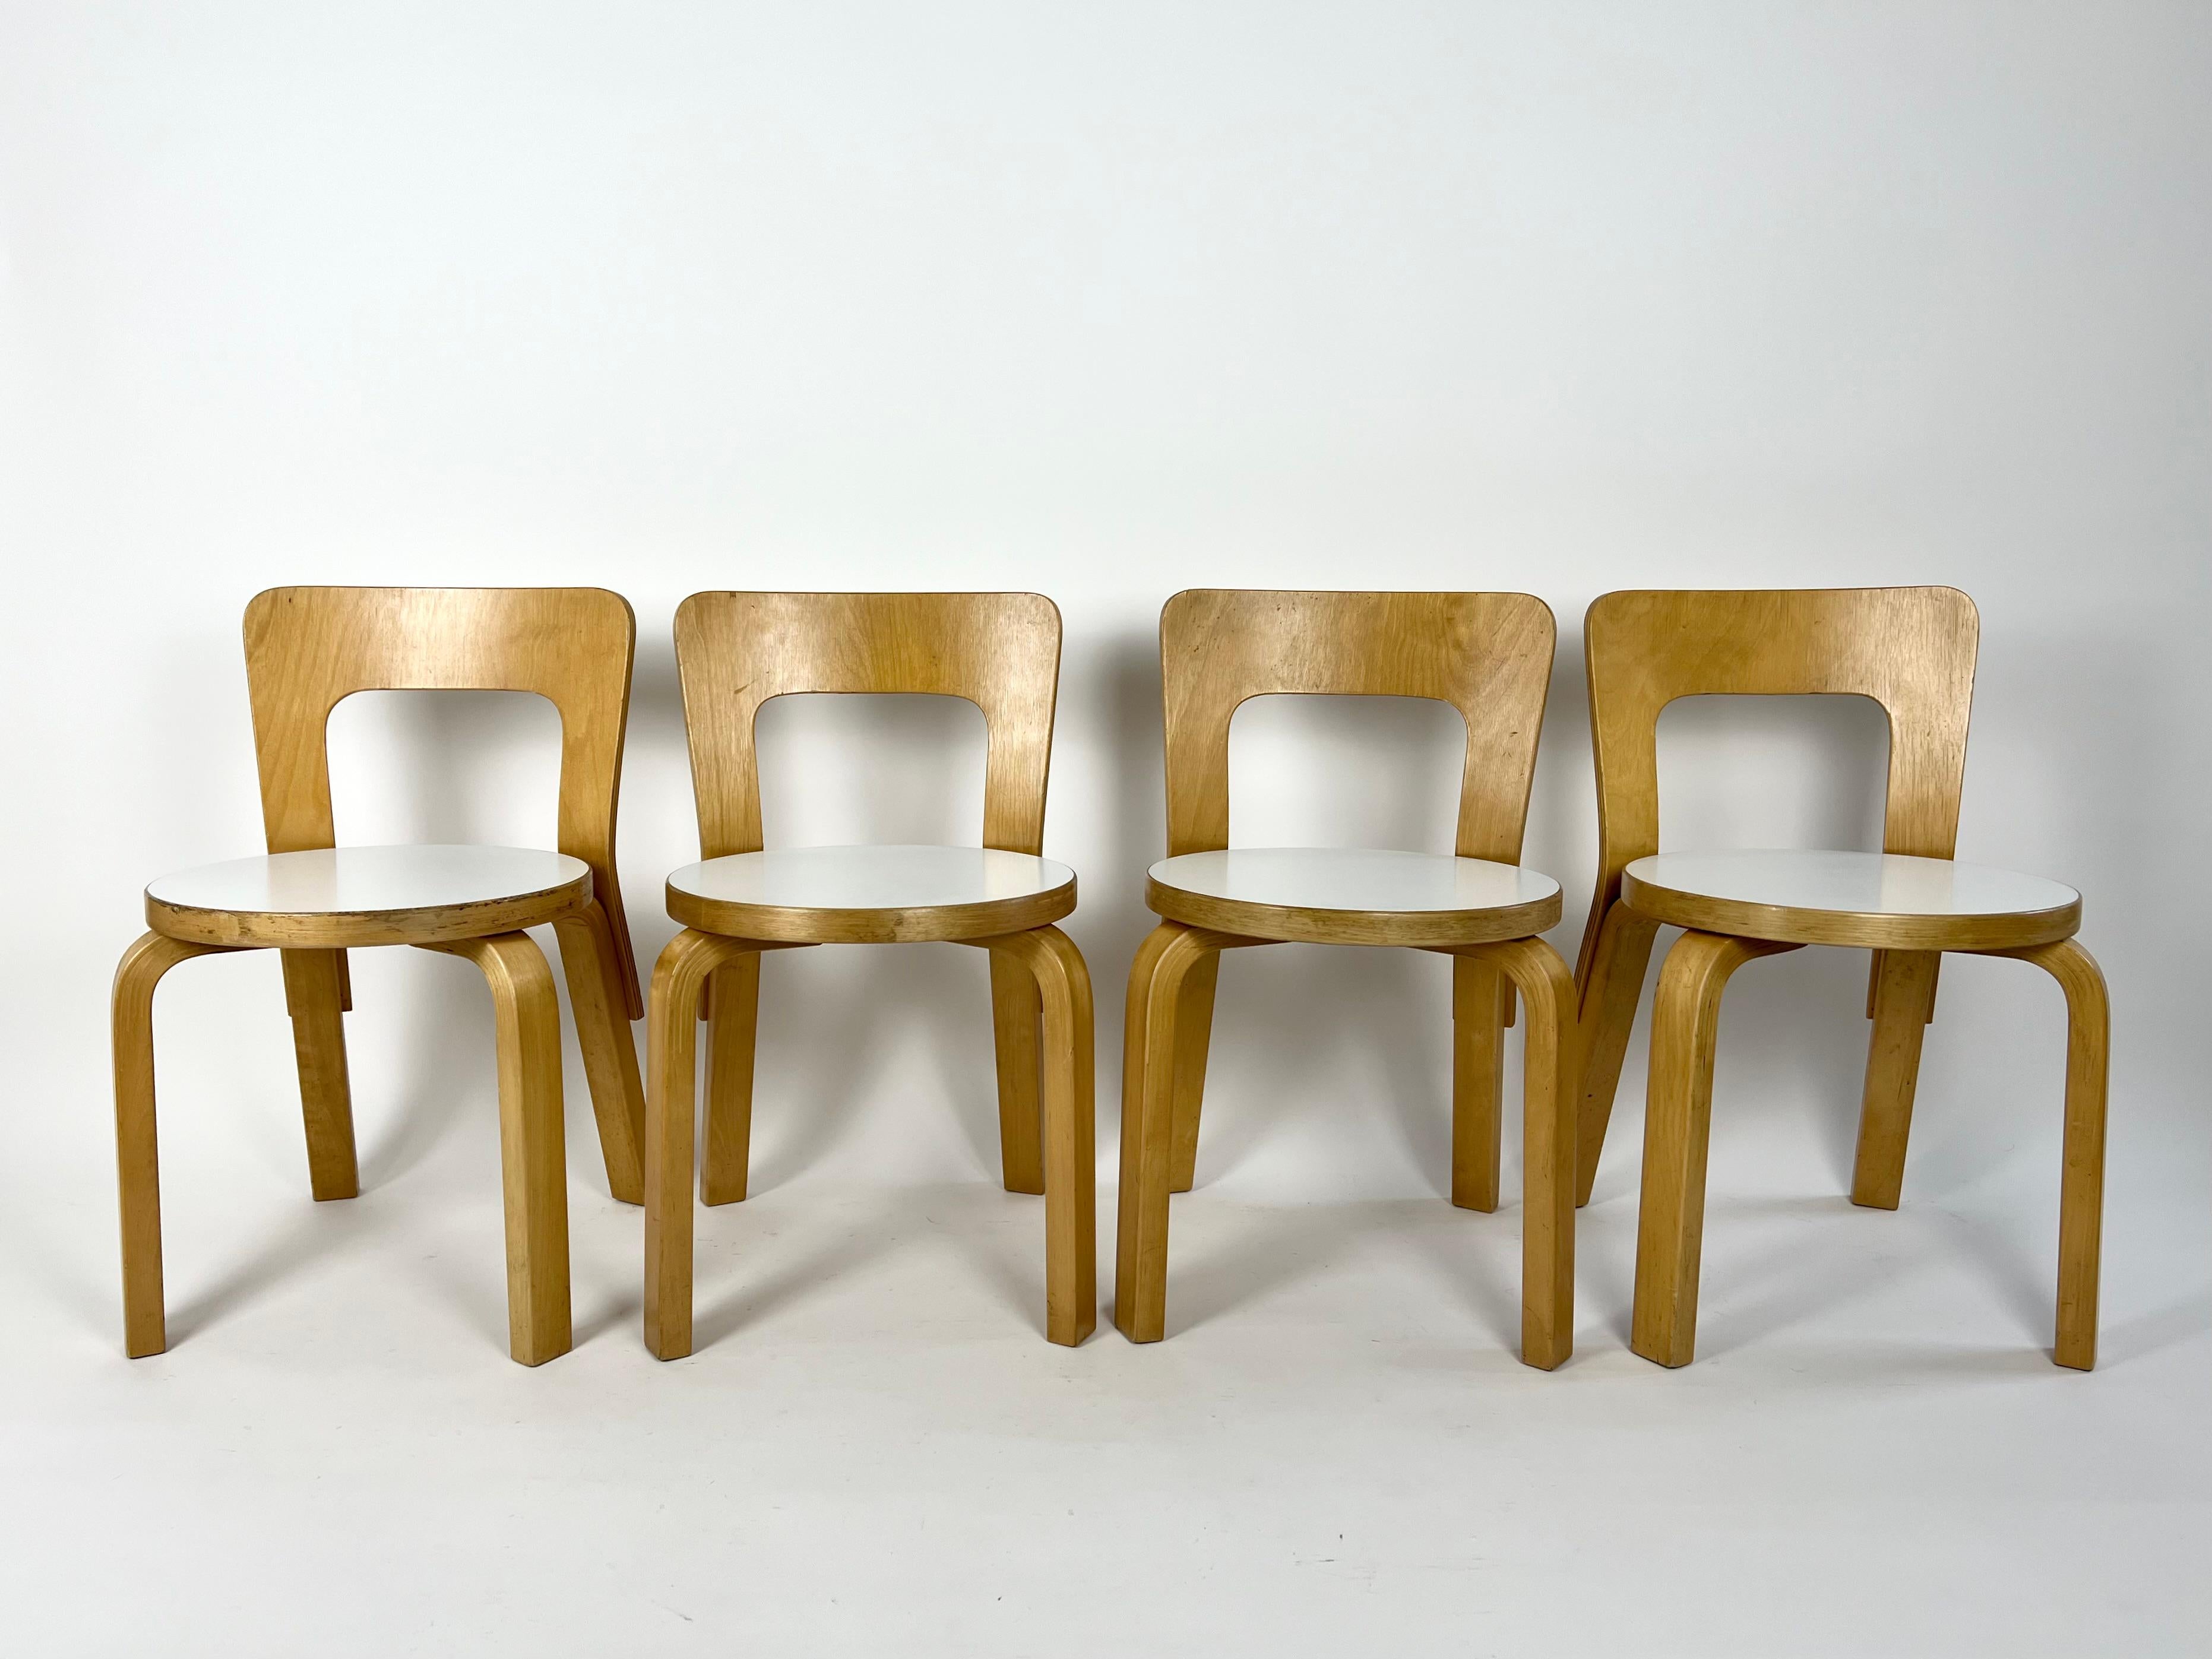 Kid's chairs by Alvar Aalto, model N65 for Artek, Finland.

This set of children's chairs date from the 1960s - 70s, retailed in the USA by ICF New York. Labels are present to the underside of all 4 chairs.

Birch bentwood with white laminate seat.